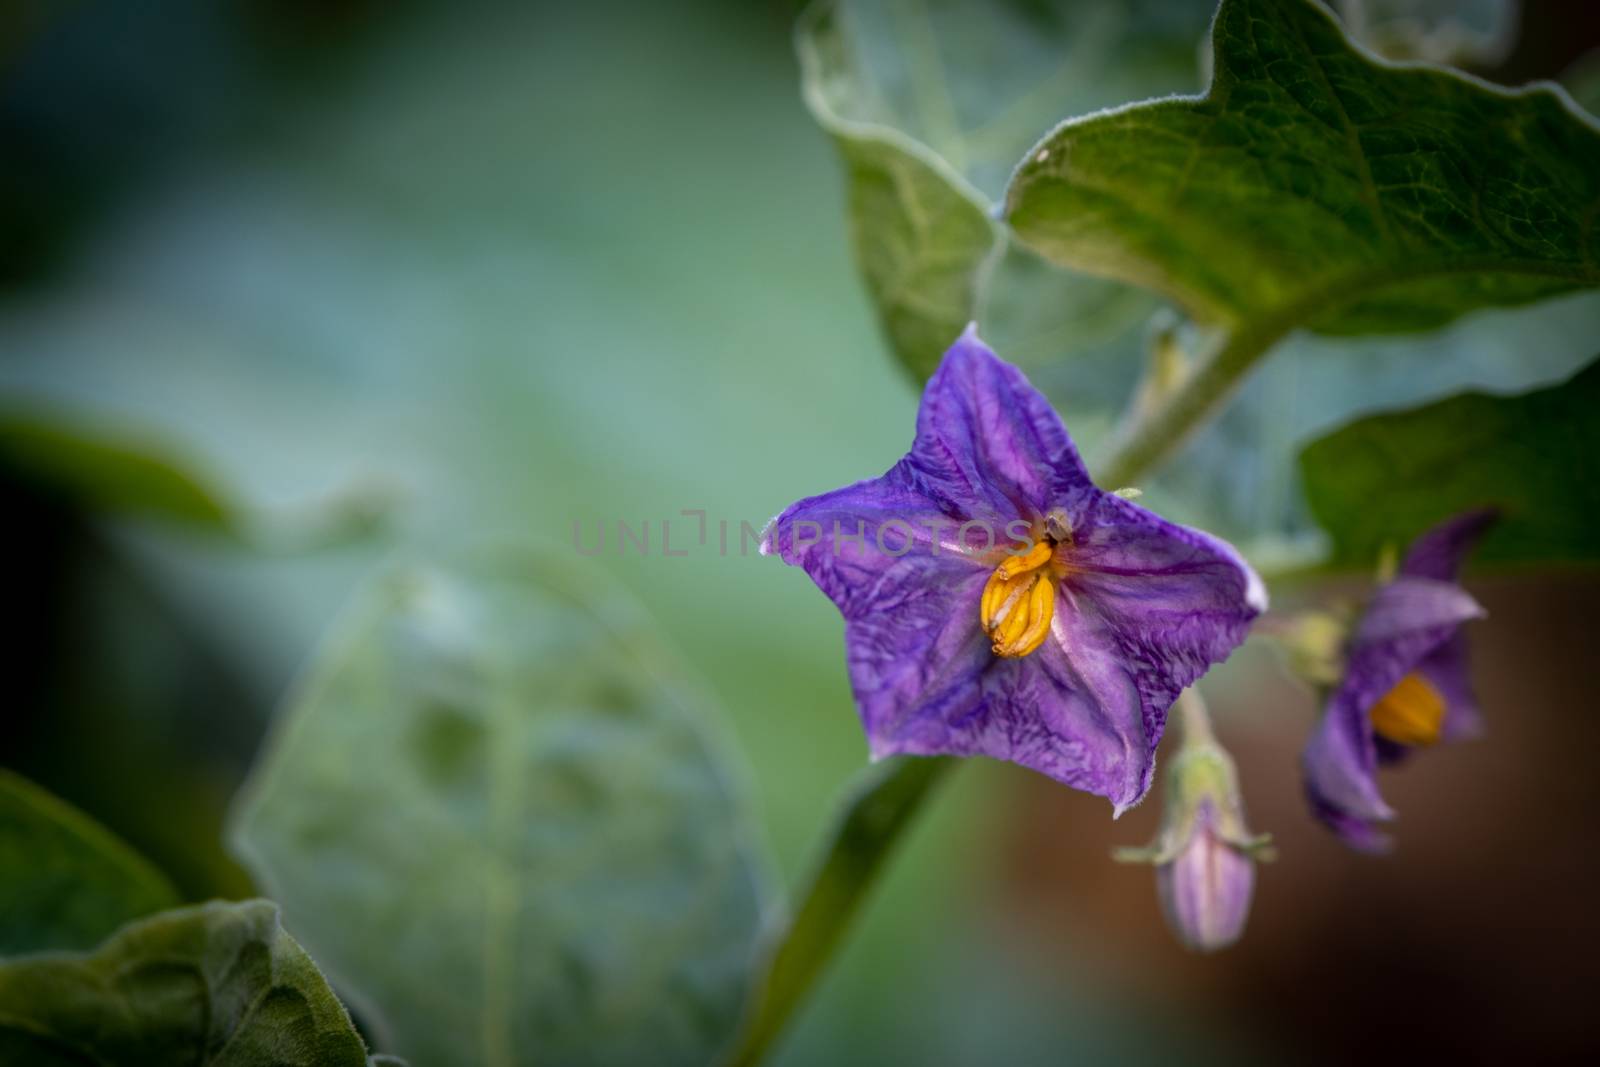 The Select focus Close up Thai Eggplant with flower on green leaf and tree with blur background